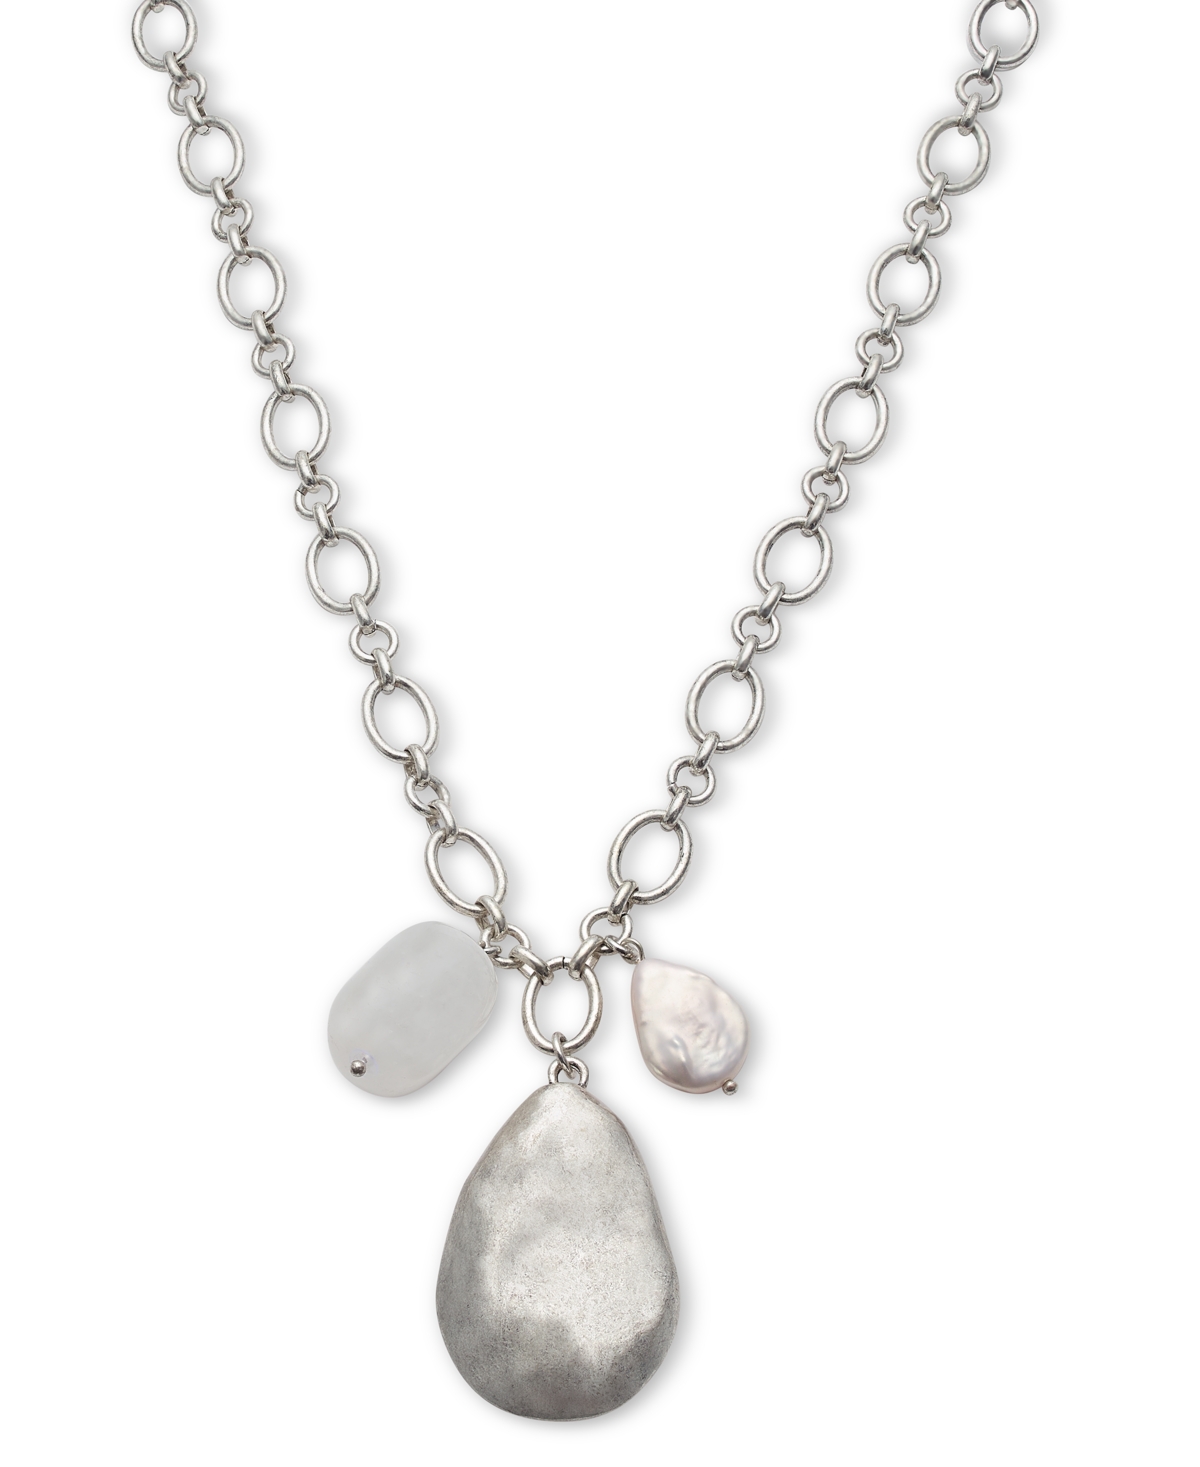 Hammered Teardrop & Freshwater Pearl Pendant Necklace, 38" + 3" extender, Created for Macy's - Silver